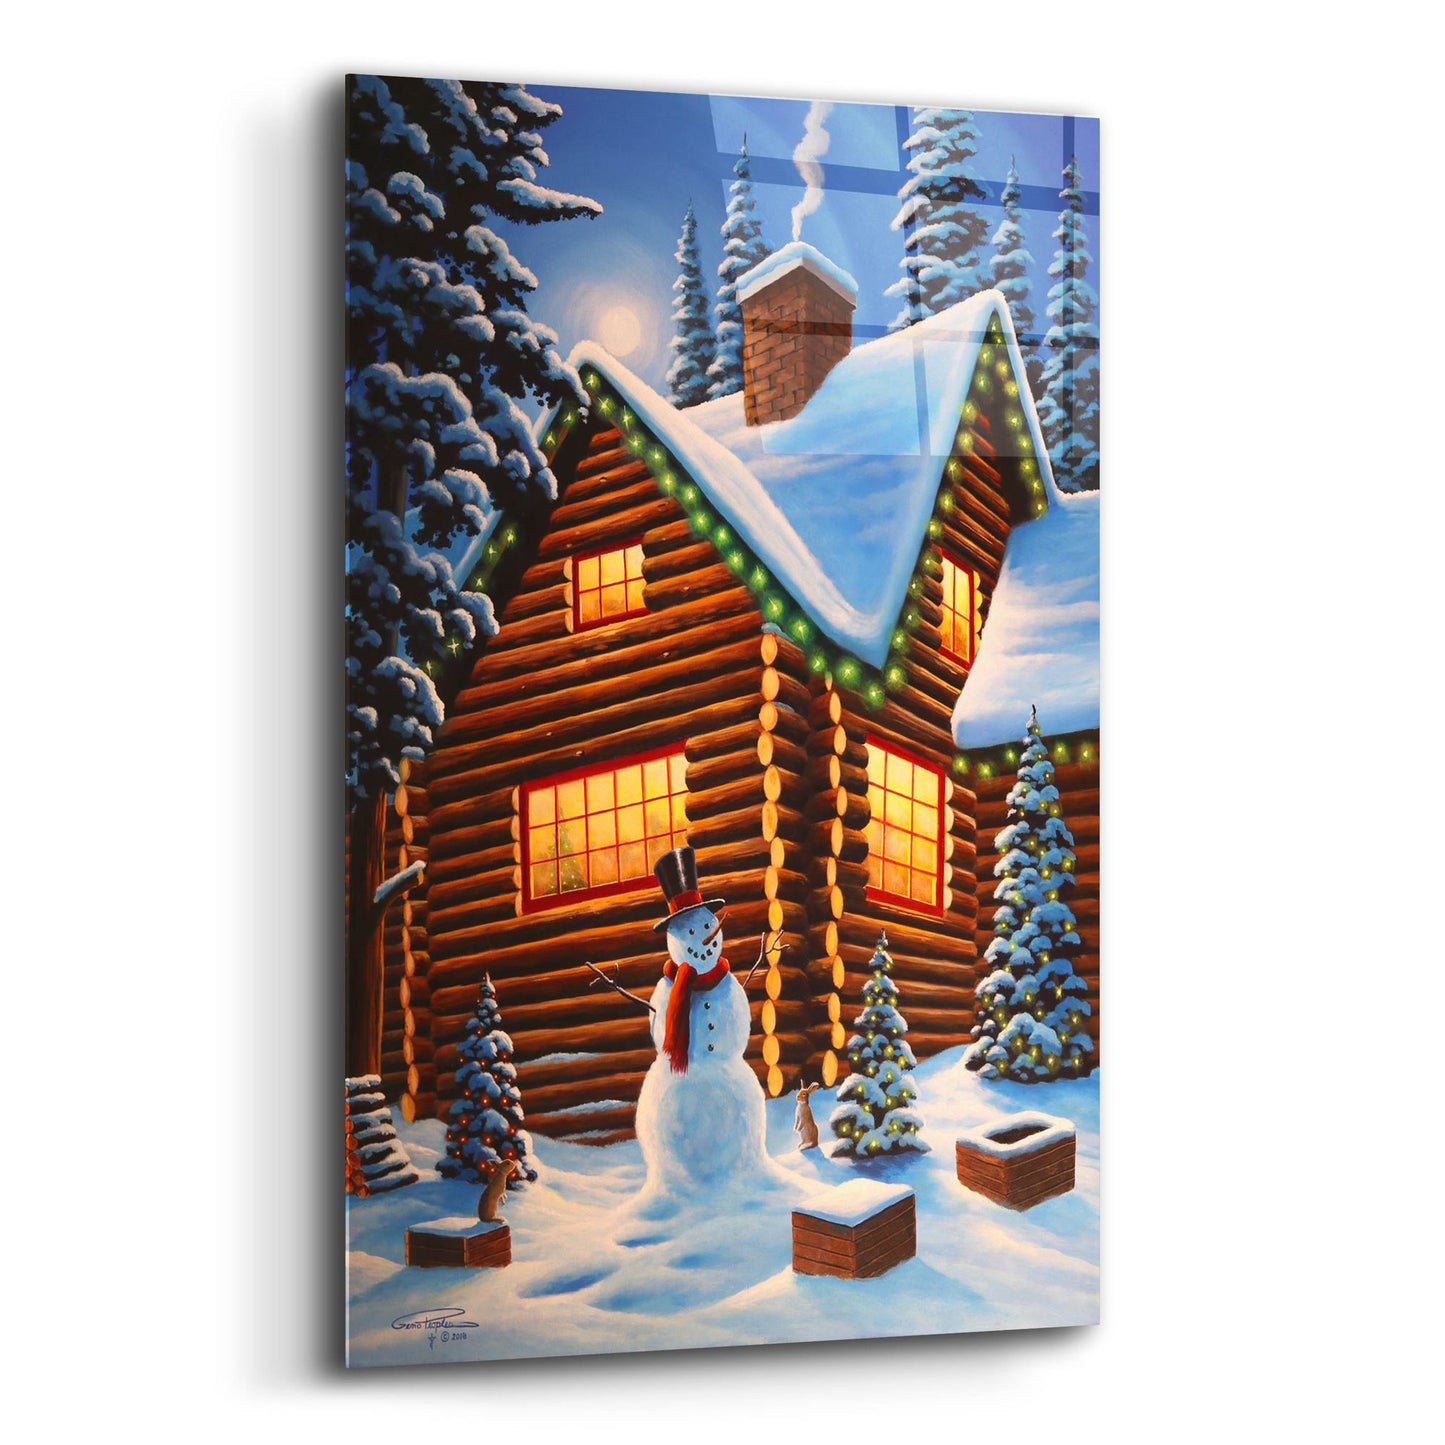 Epic Art 'Cozy Christmas' by Geno Peoples, Acrylic Glass Wall Art,16x24